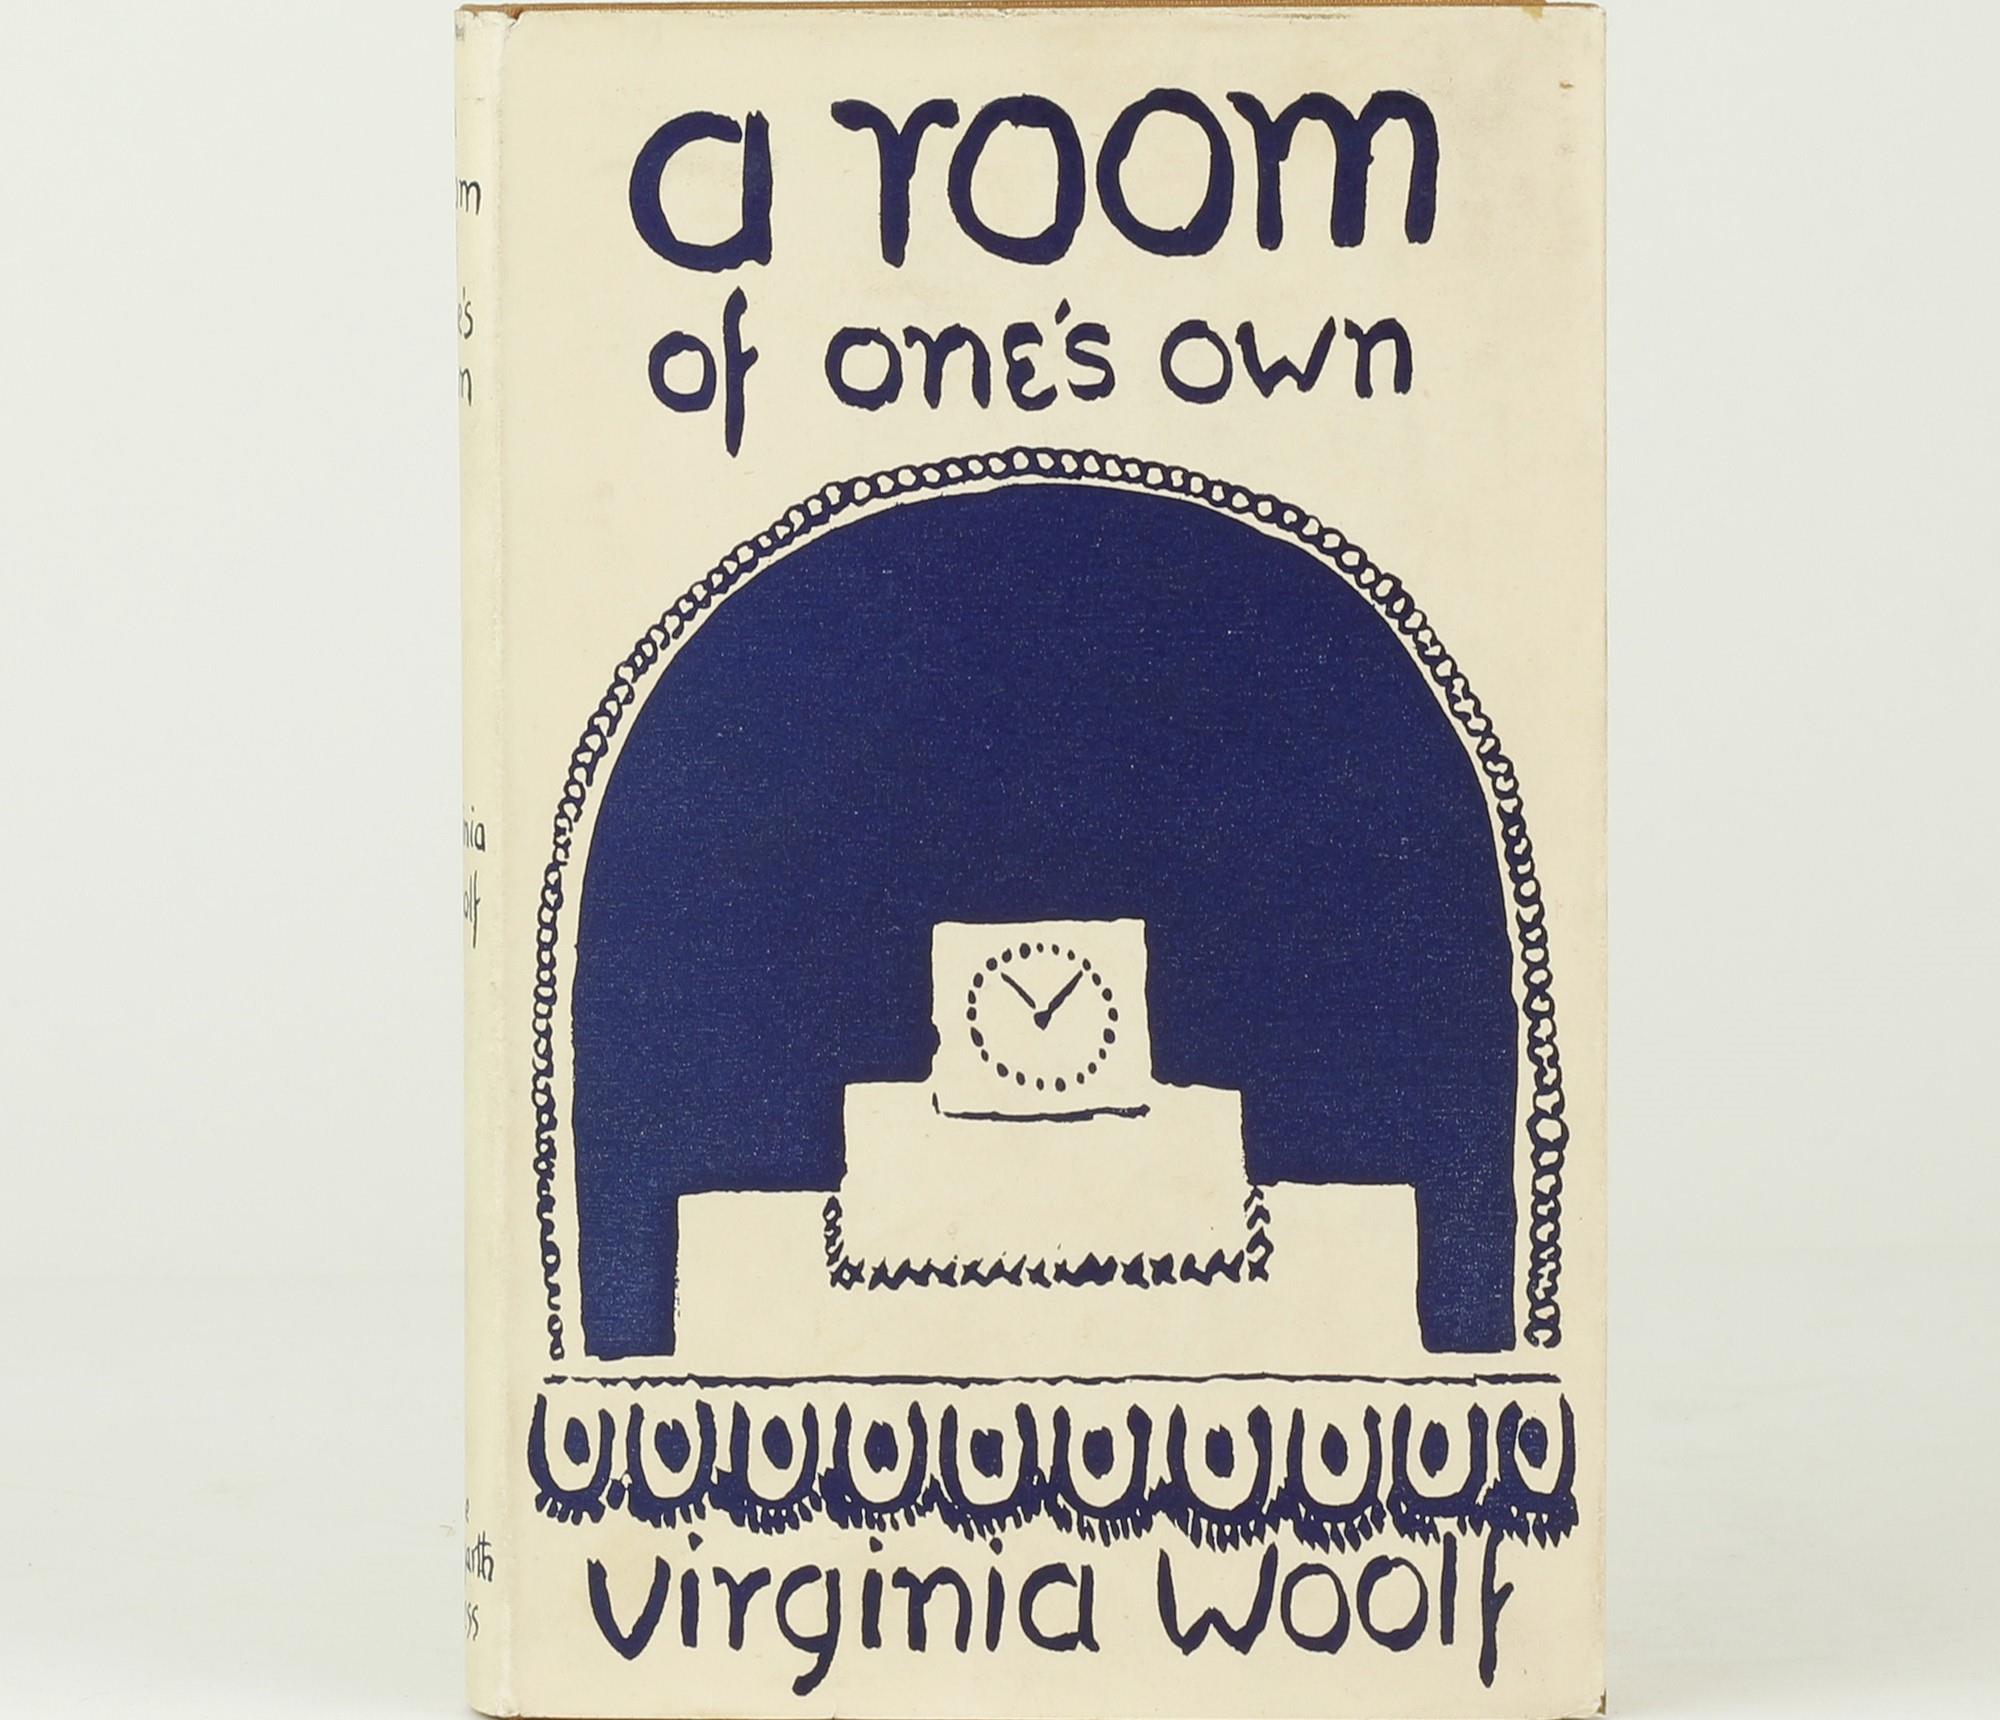 18-astonishing-facts-about-a-room-of-ones-own-virginia-woolf